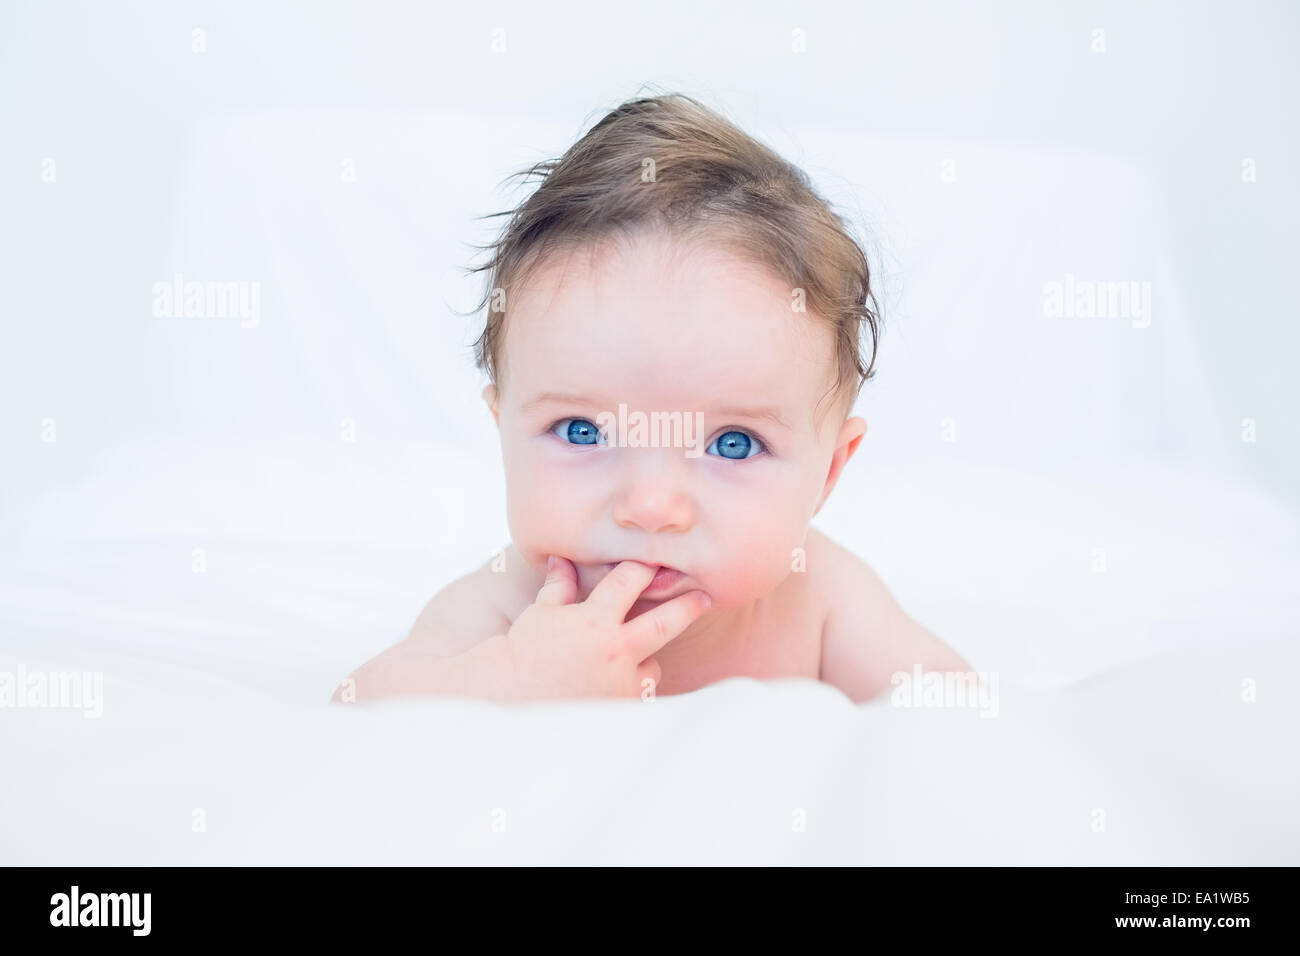 Cute baby with finger in mouth Stock Photo